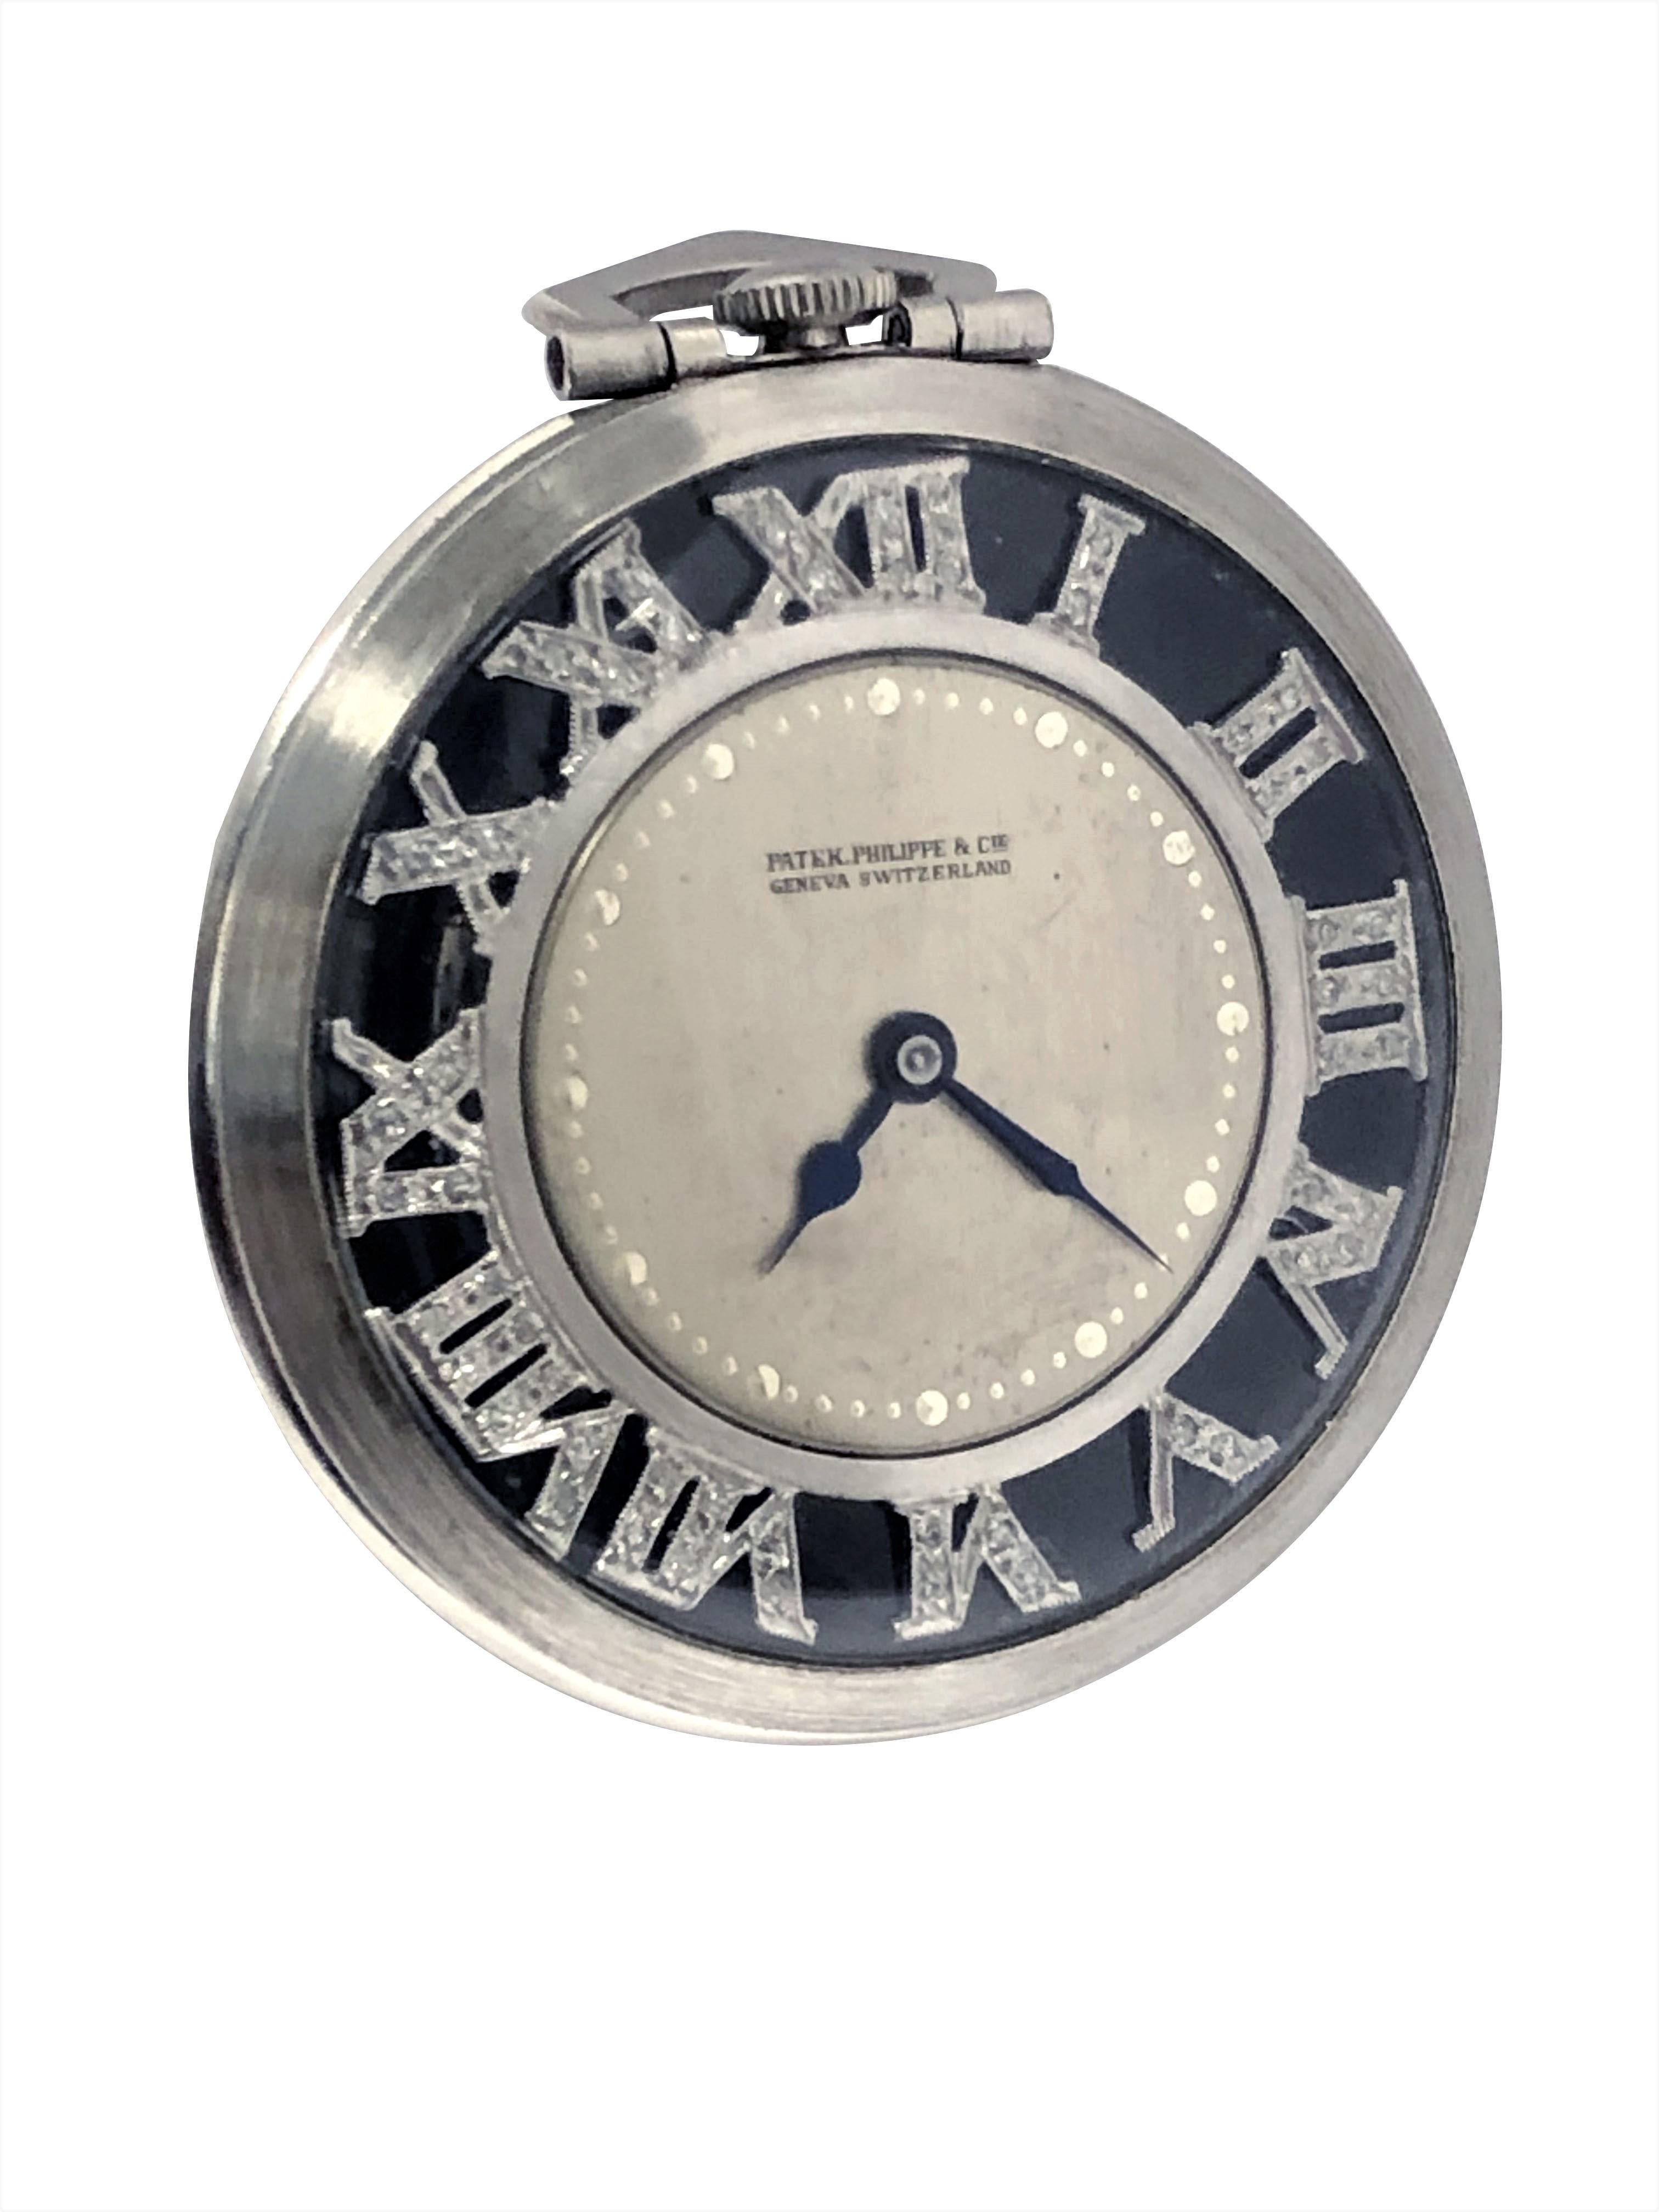 Circa 1930s Art Deco Patek Philippe Pocket watch, 41 M.M. 3 piece Platinum Case, 18 Jewel mechanical, manual wind Nickle Lever movement. Silver Satin dial with Diamond set Roman Numerals set on top of a background of Onyx.  This Particular watch was